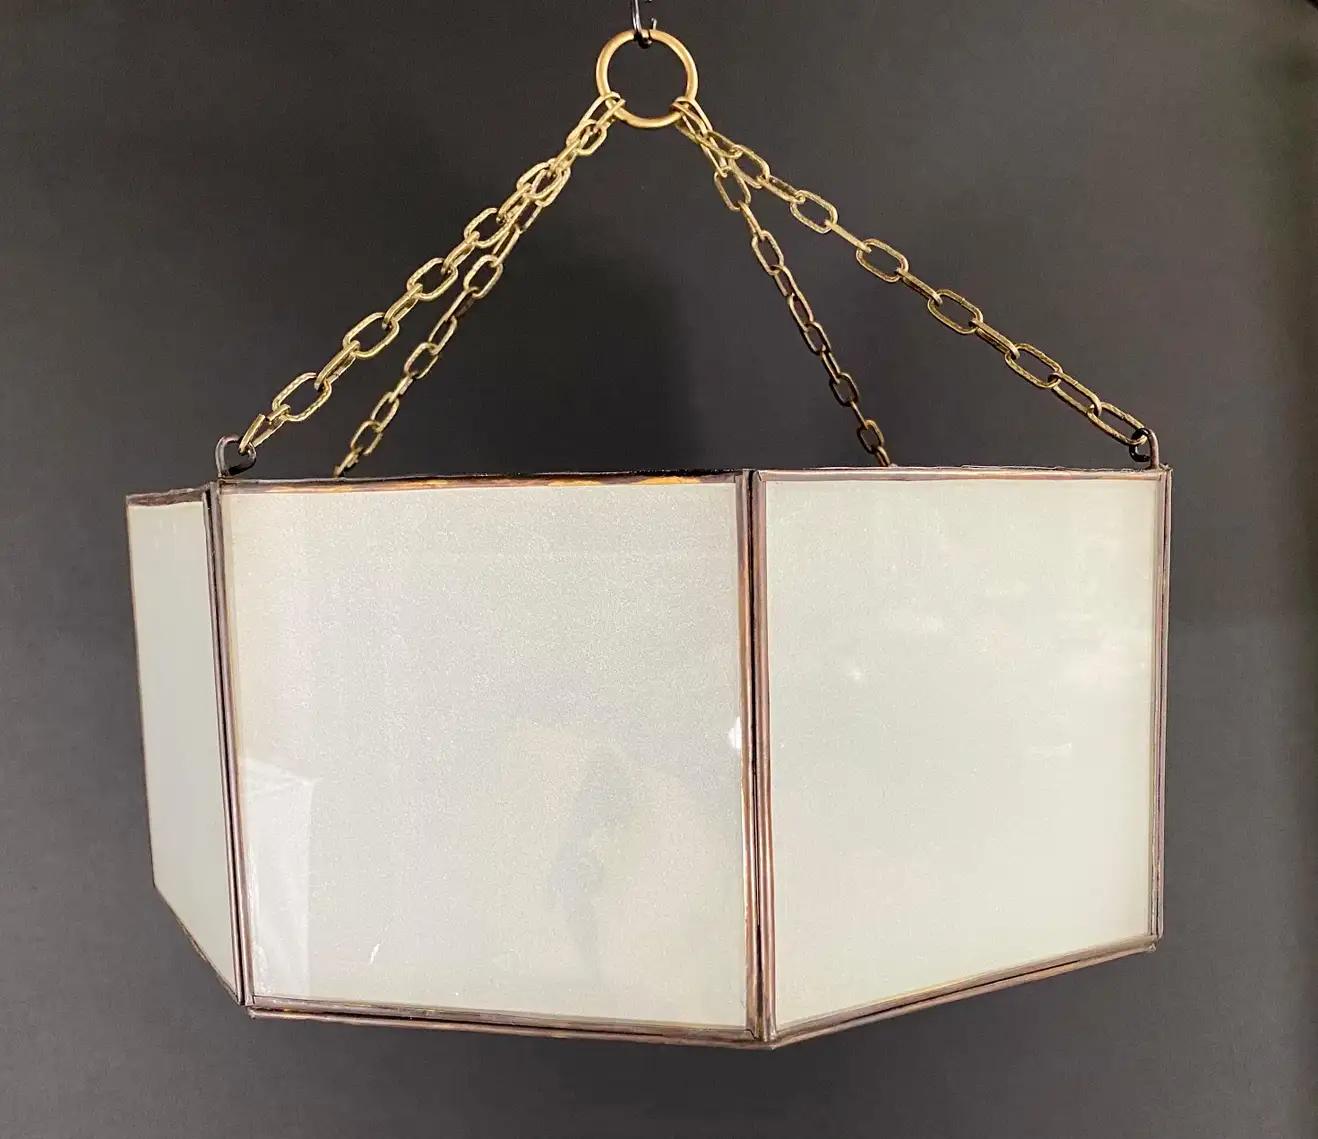 An Art Deco style pendant, lantern or flush mount. Featuring a stylish octagon shape, the pendant is finely hand-made of individual sandblasted frosted milk glass panels and patinated bronze frame. The octagonal shaped pendant has a small door on